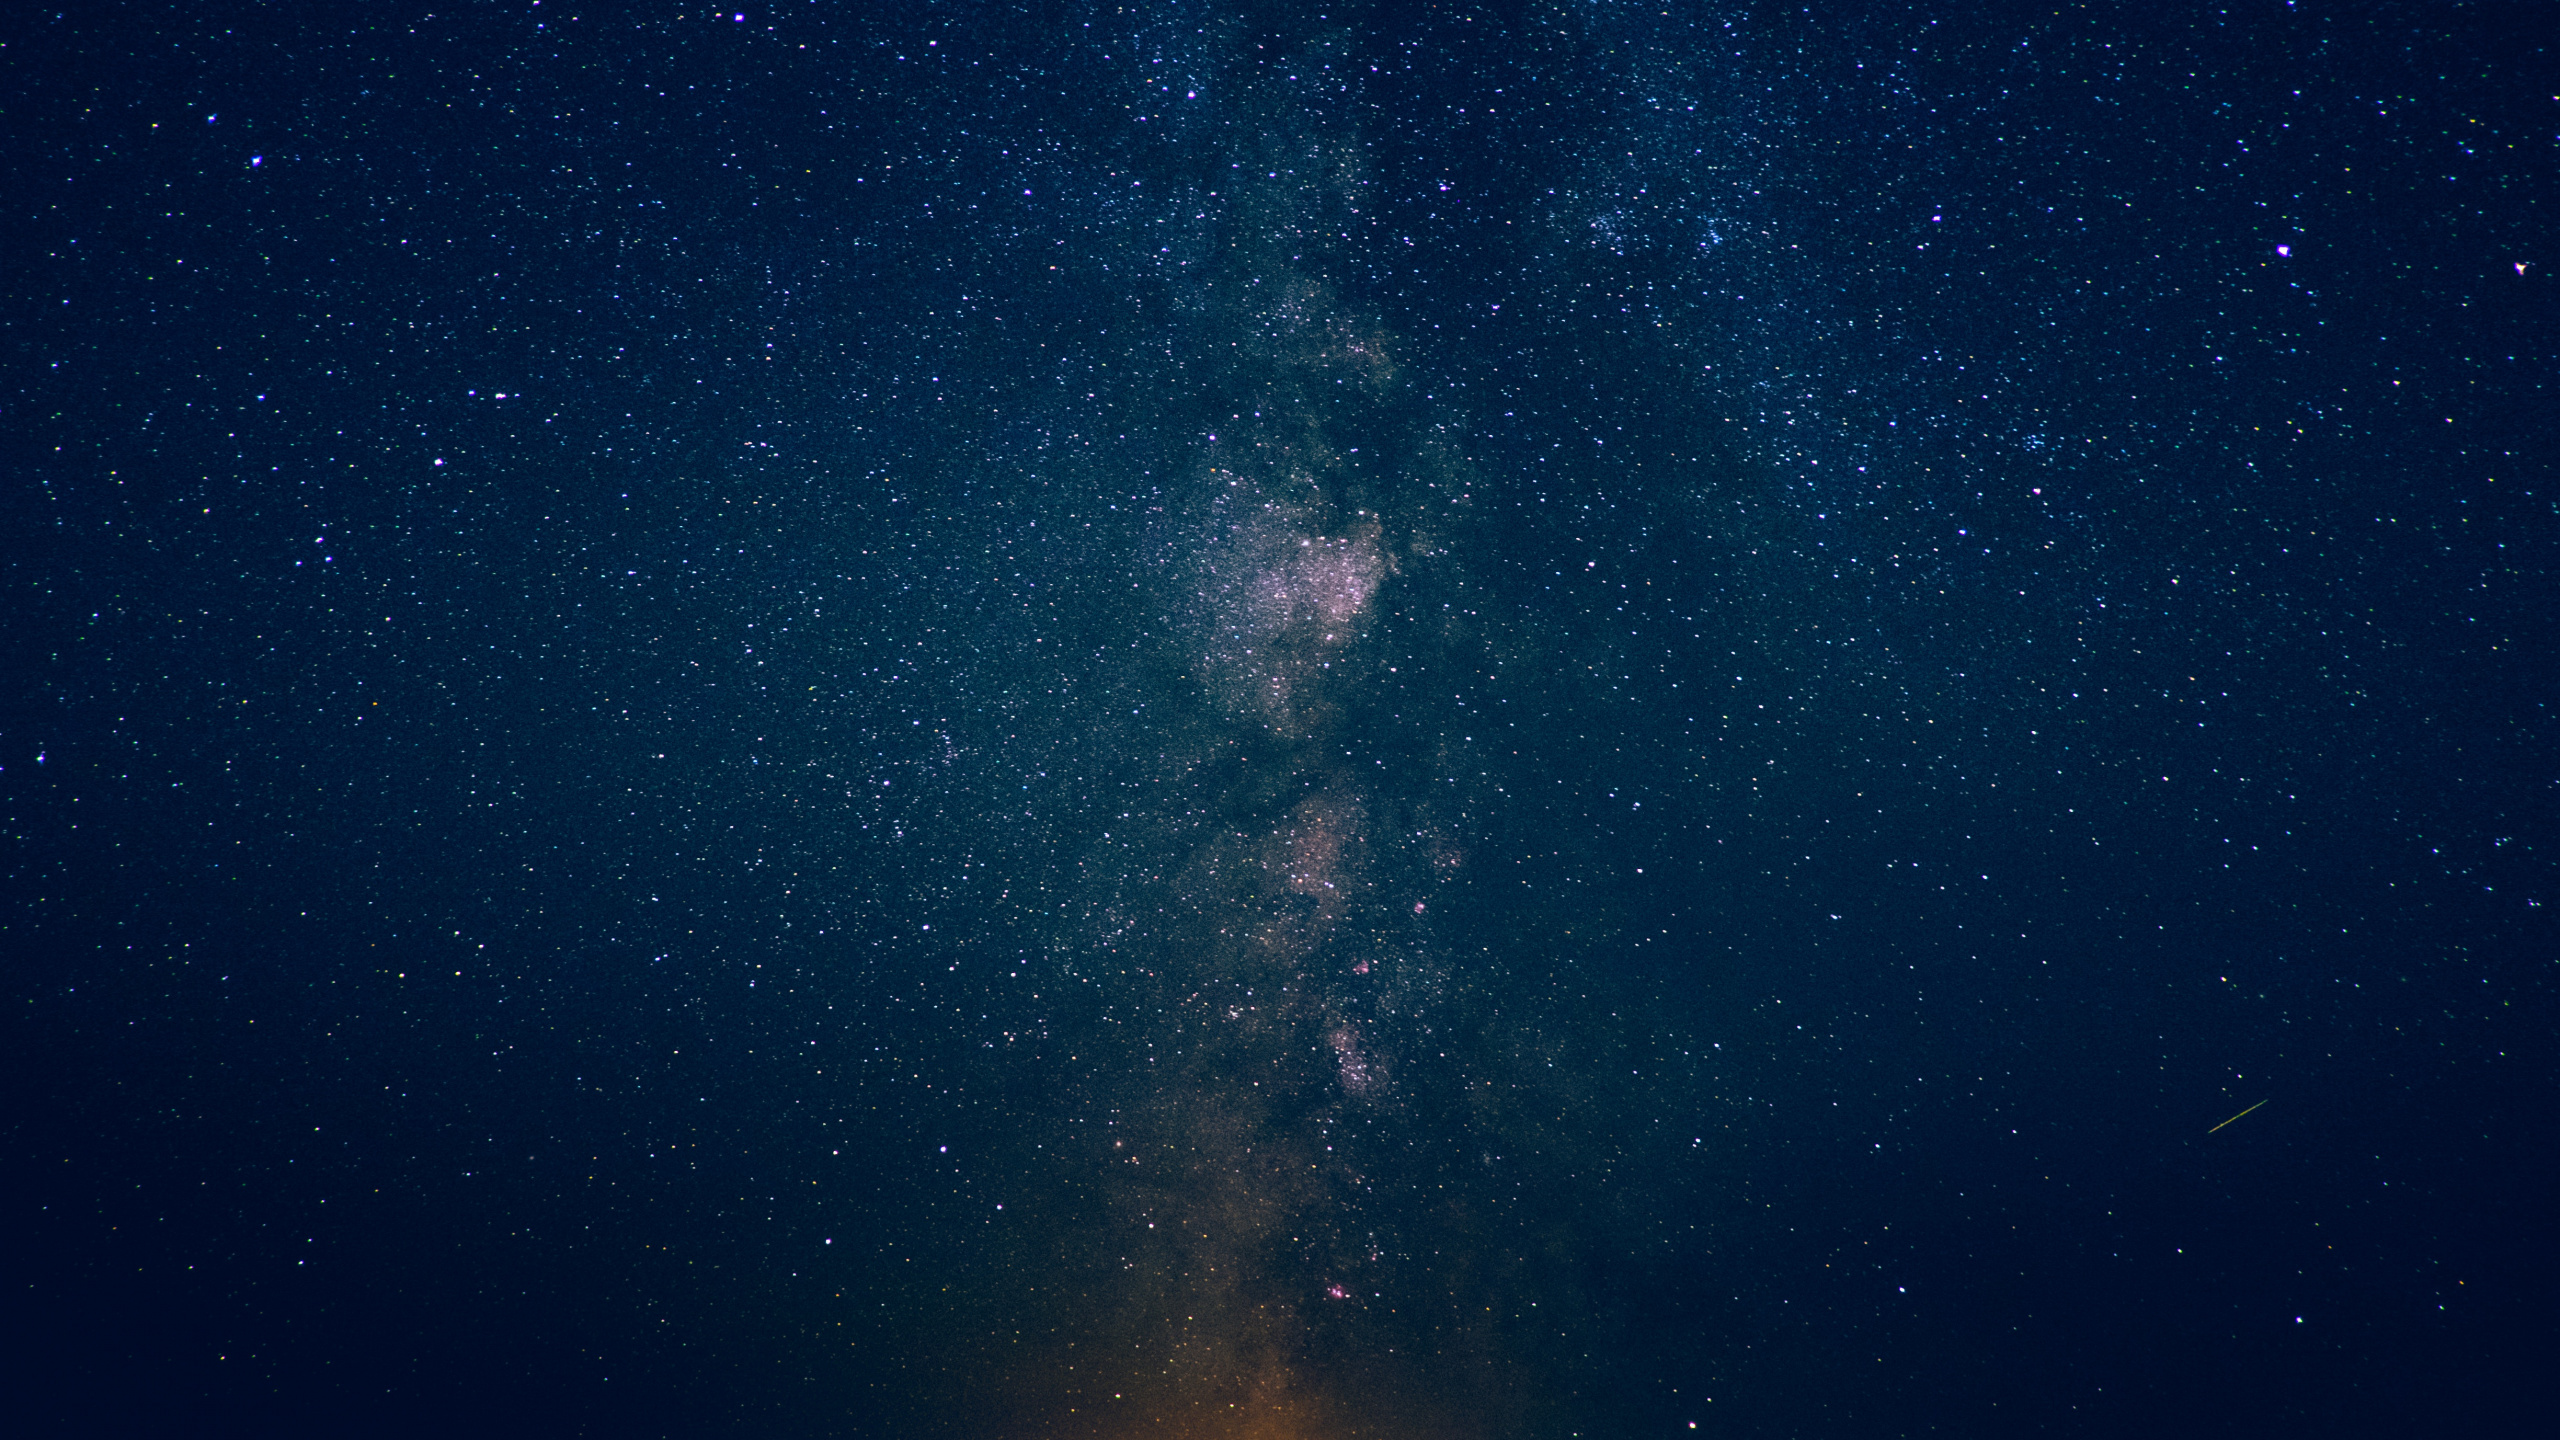 Starry Night Sky Over Starry Night. Wallpaper in 2560x1440 Resolution